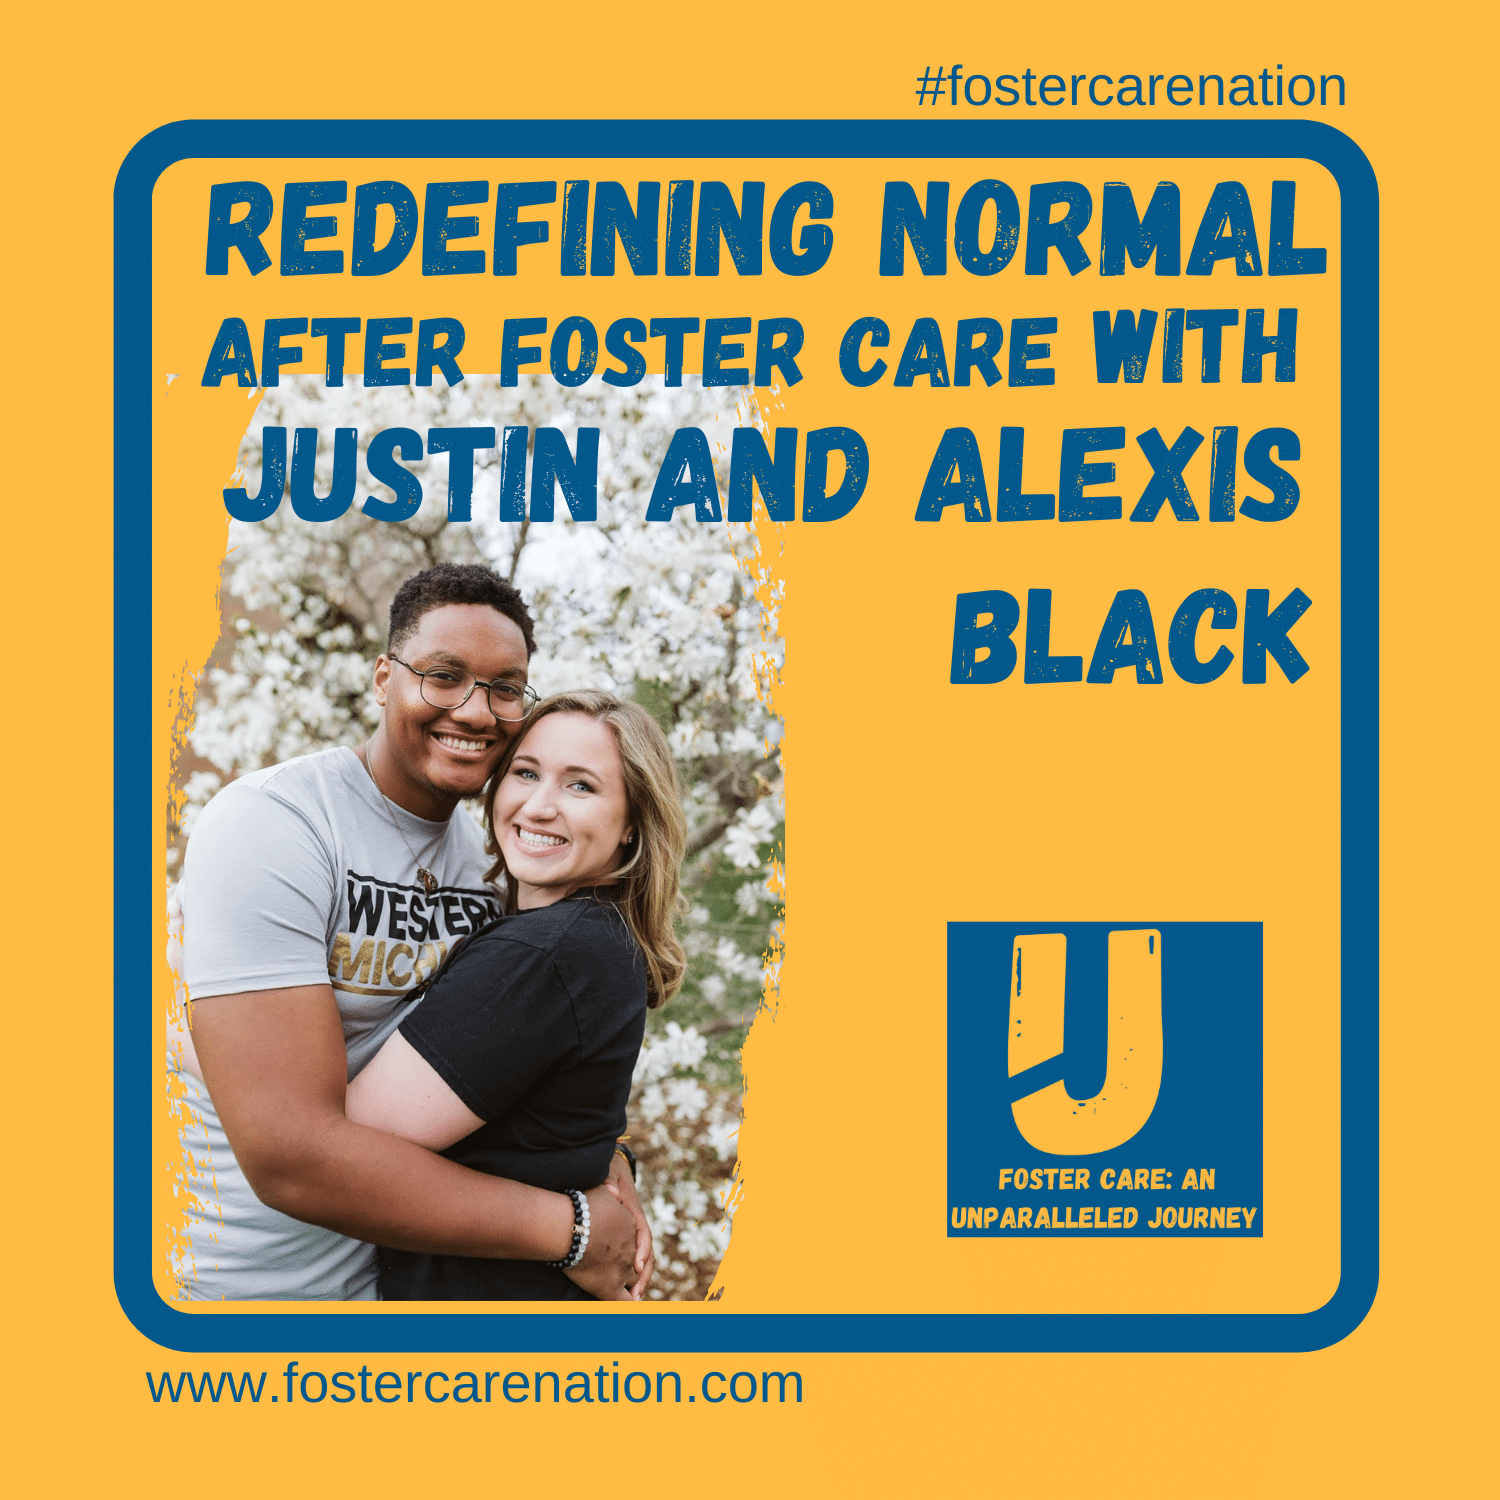 Redefining Normal after Foster Care with Justin and Alexis Black